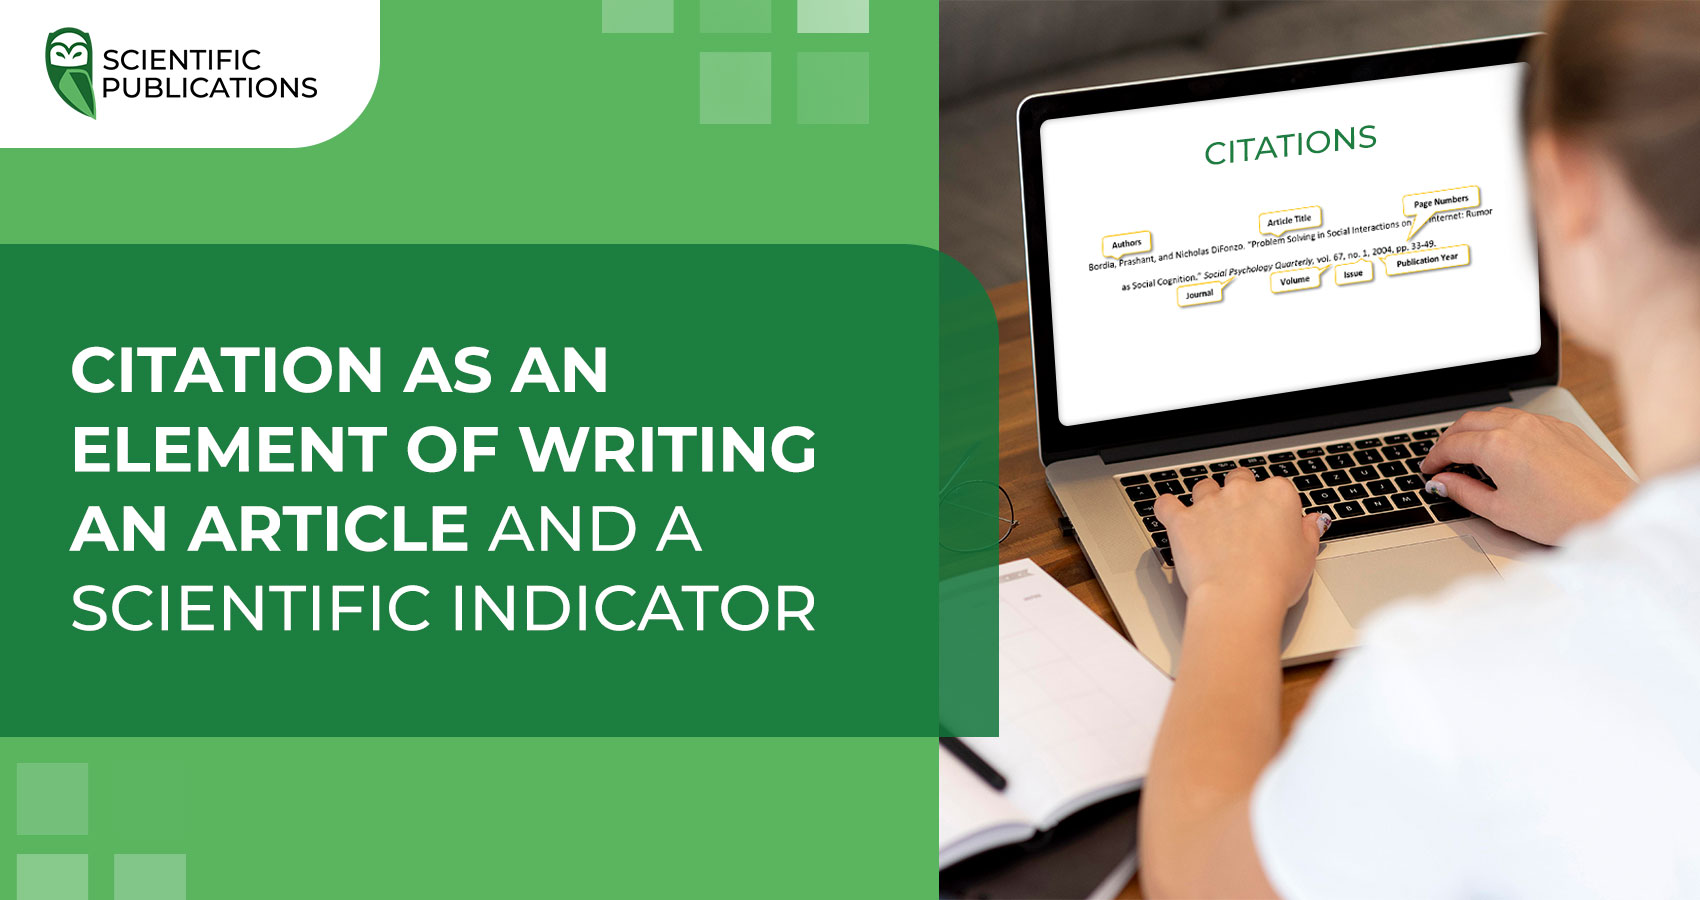 Citation as an element of writing an article and a scientific indicator  